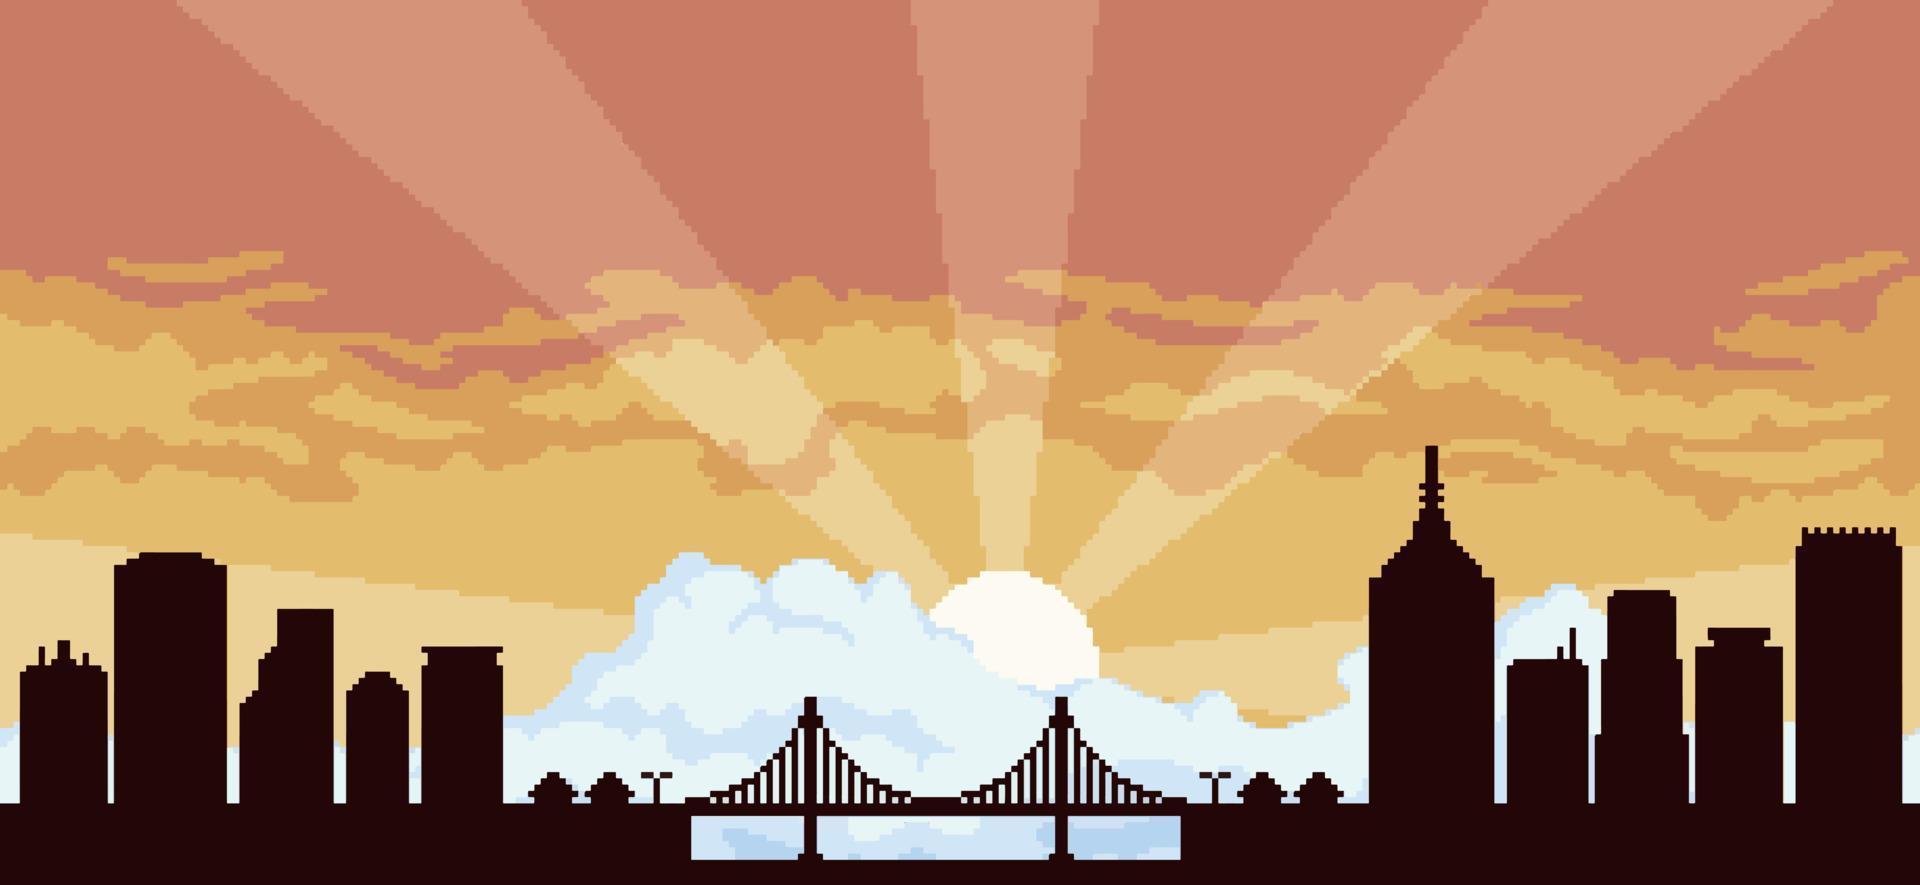 Pixel art city background at sunset with buildings, constructions, bridge and cloudy sky for 8bit game vector